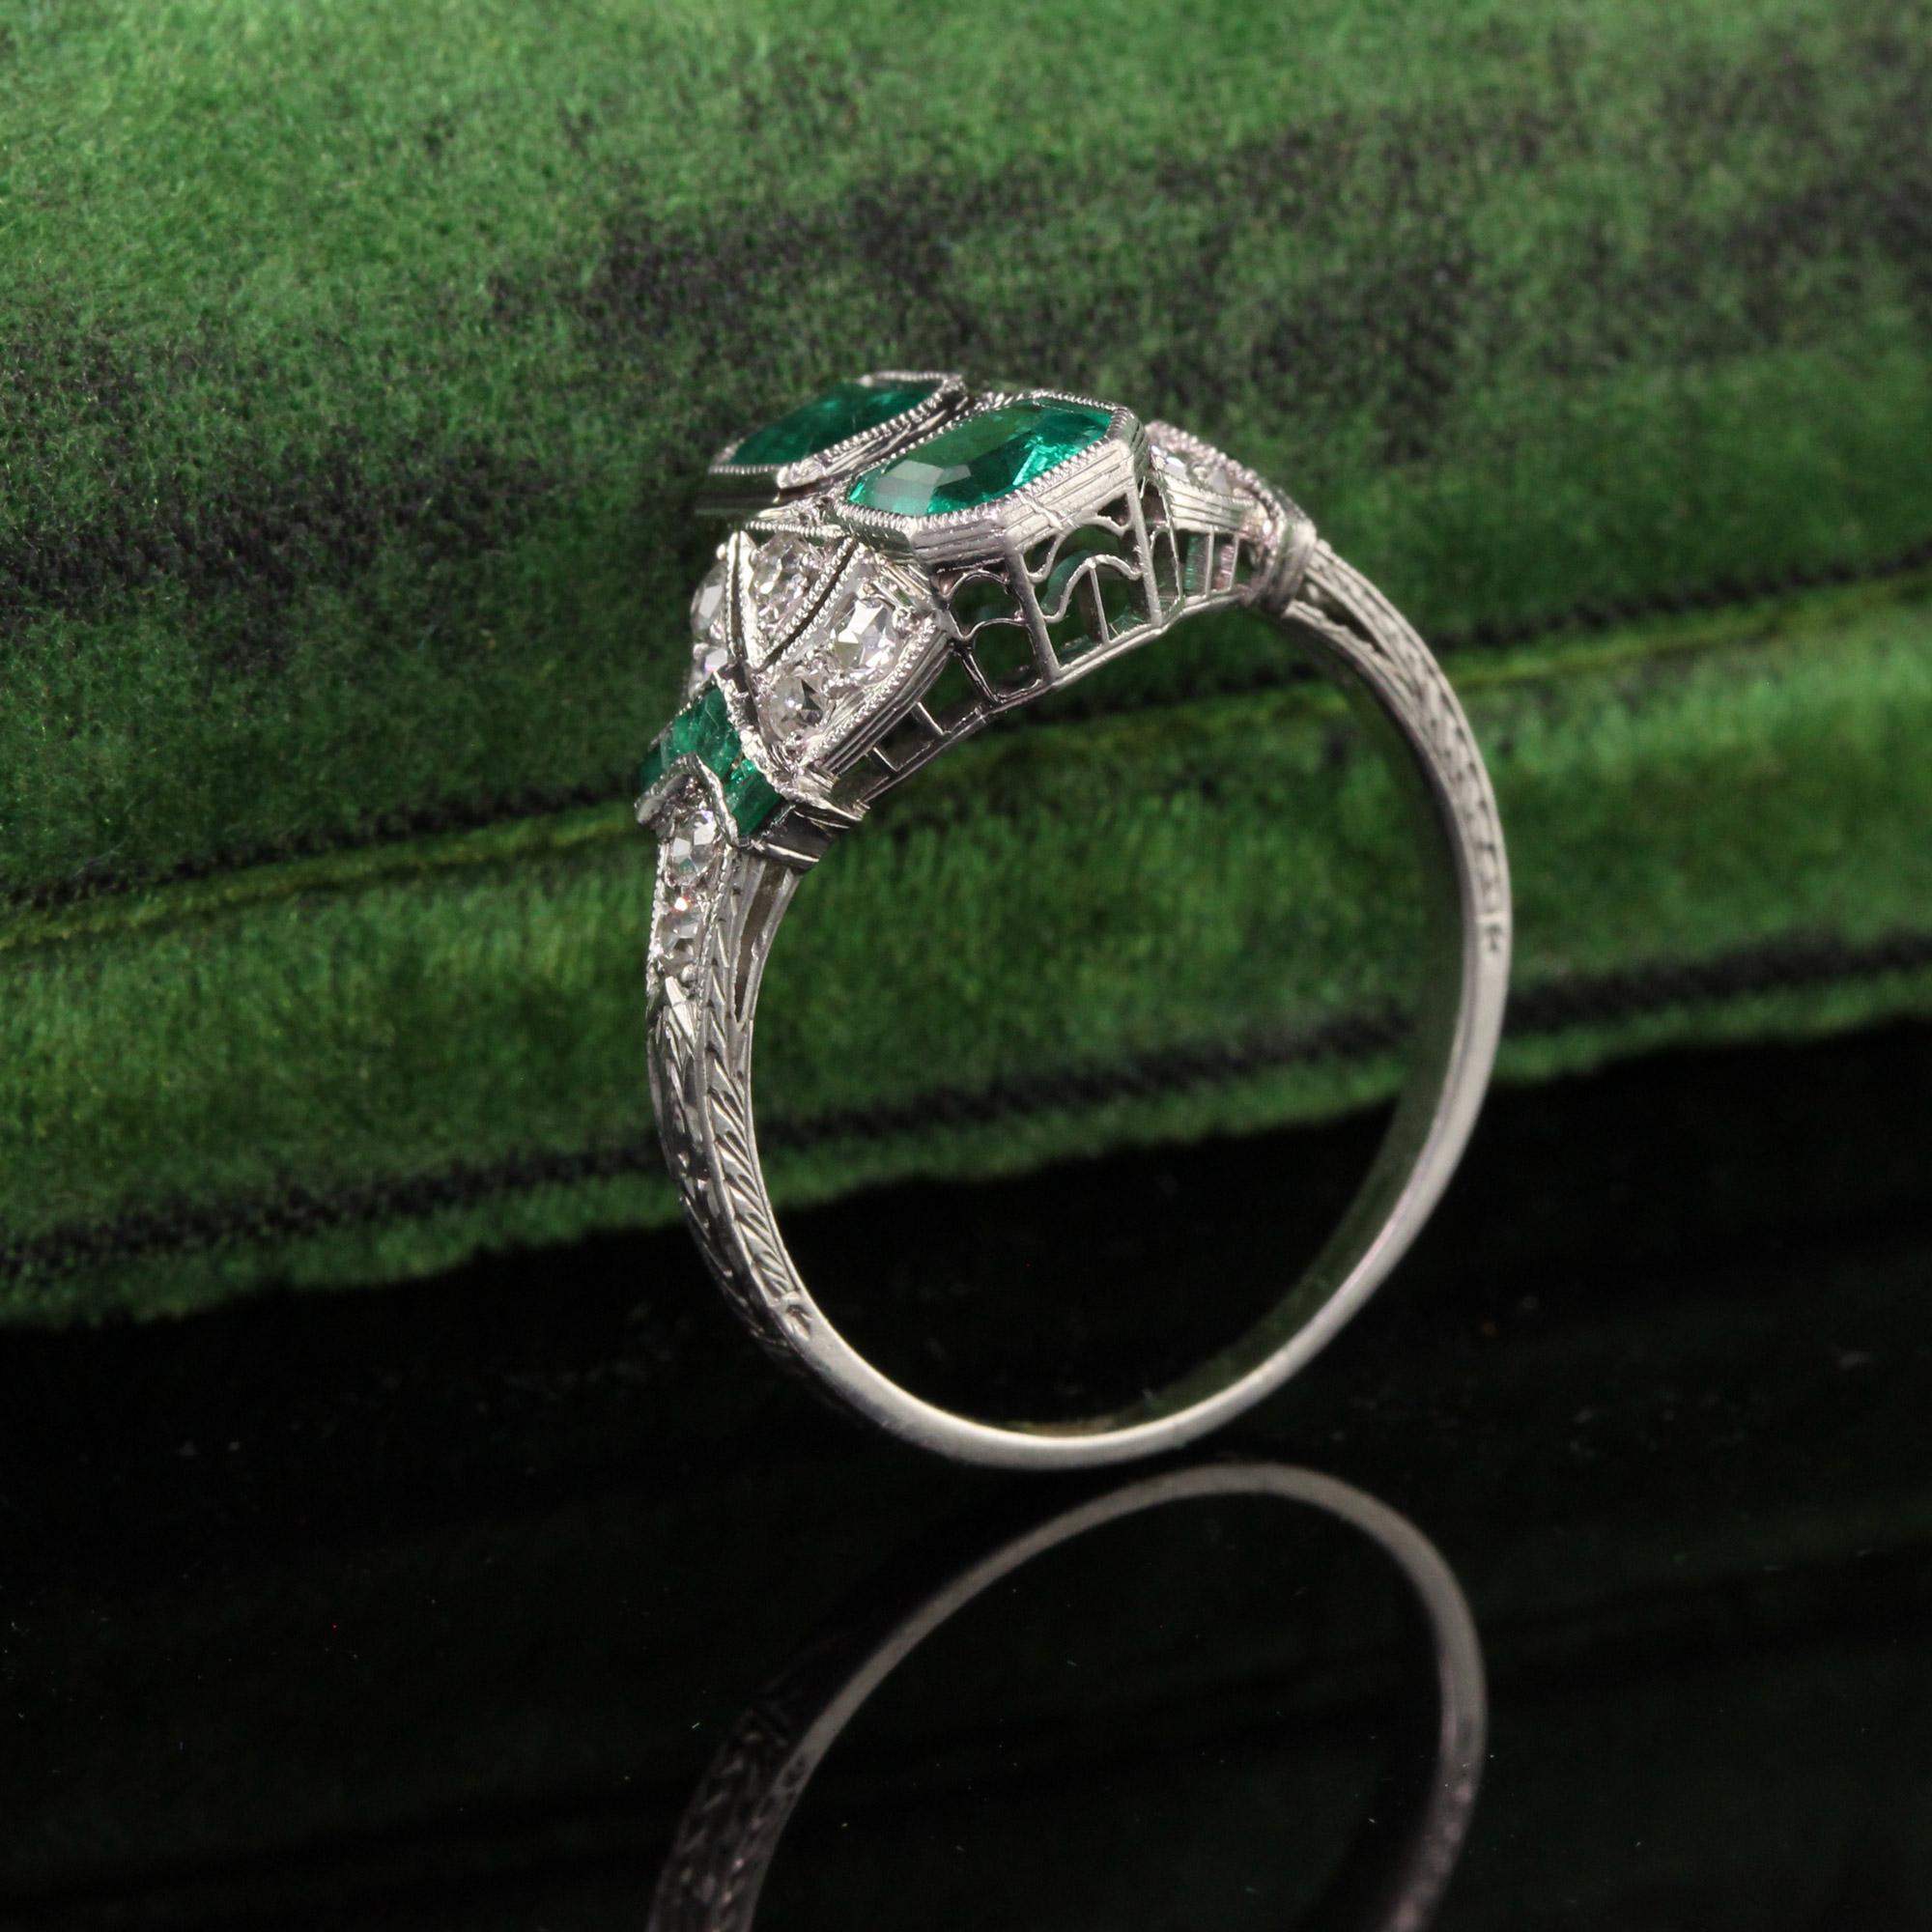 Beautiful Antique Art Deco Platinum Emerald and Diamond Filigree Ring. This amazing ring features two colombian emeralds in the center of a filigree mounting with single cut diamonds and french cut emeralds. This one is a stunner!

Item